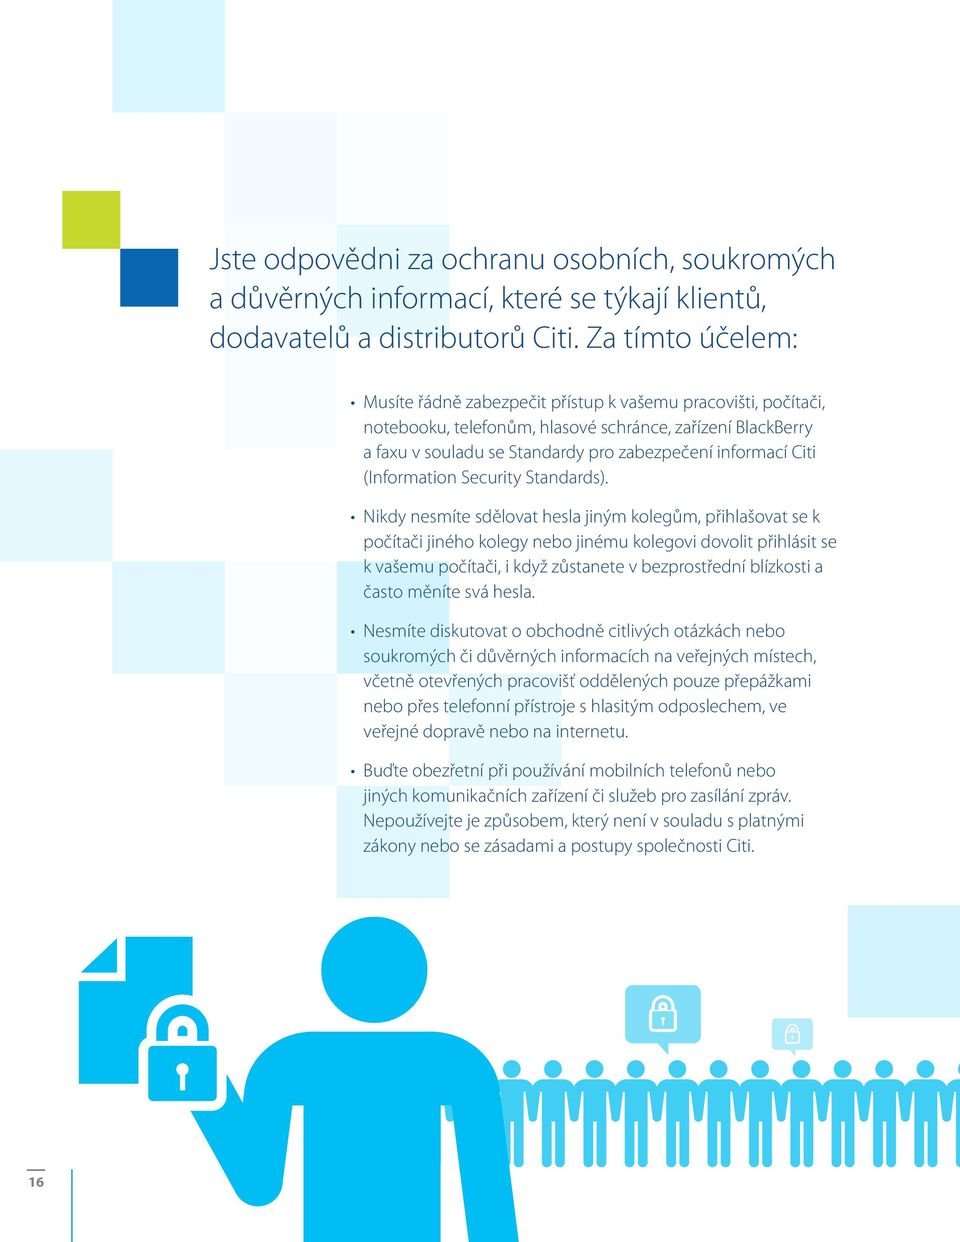 Citi (Information Security Standards).